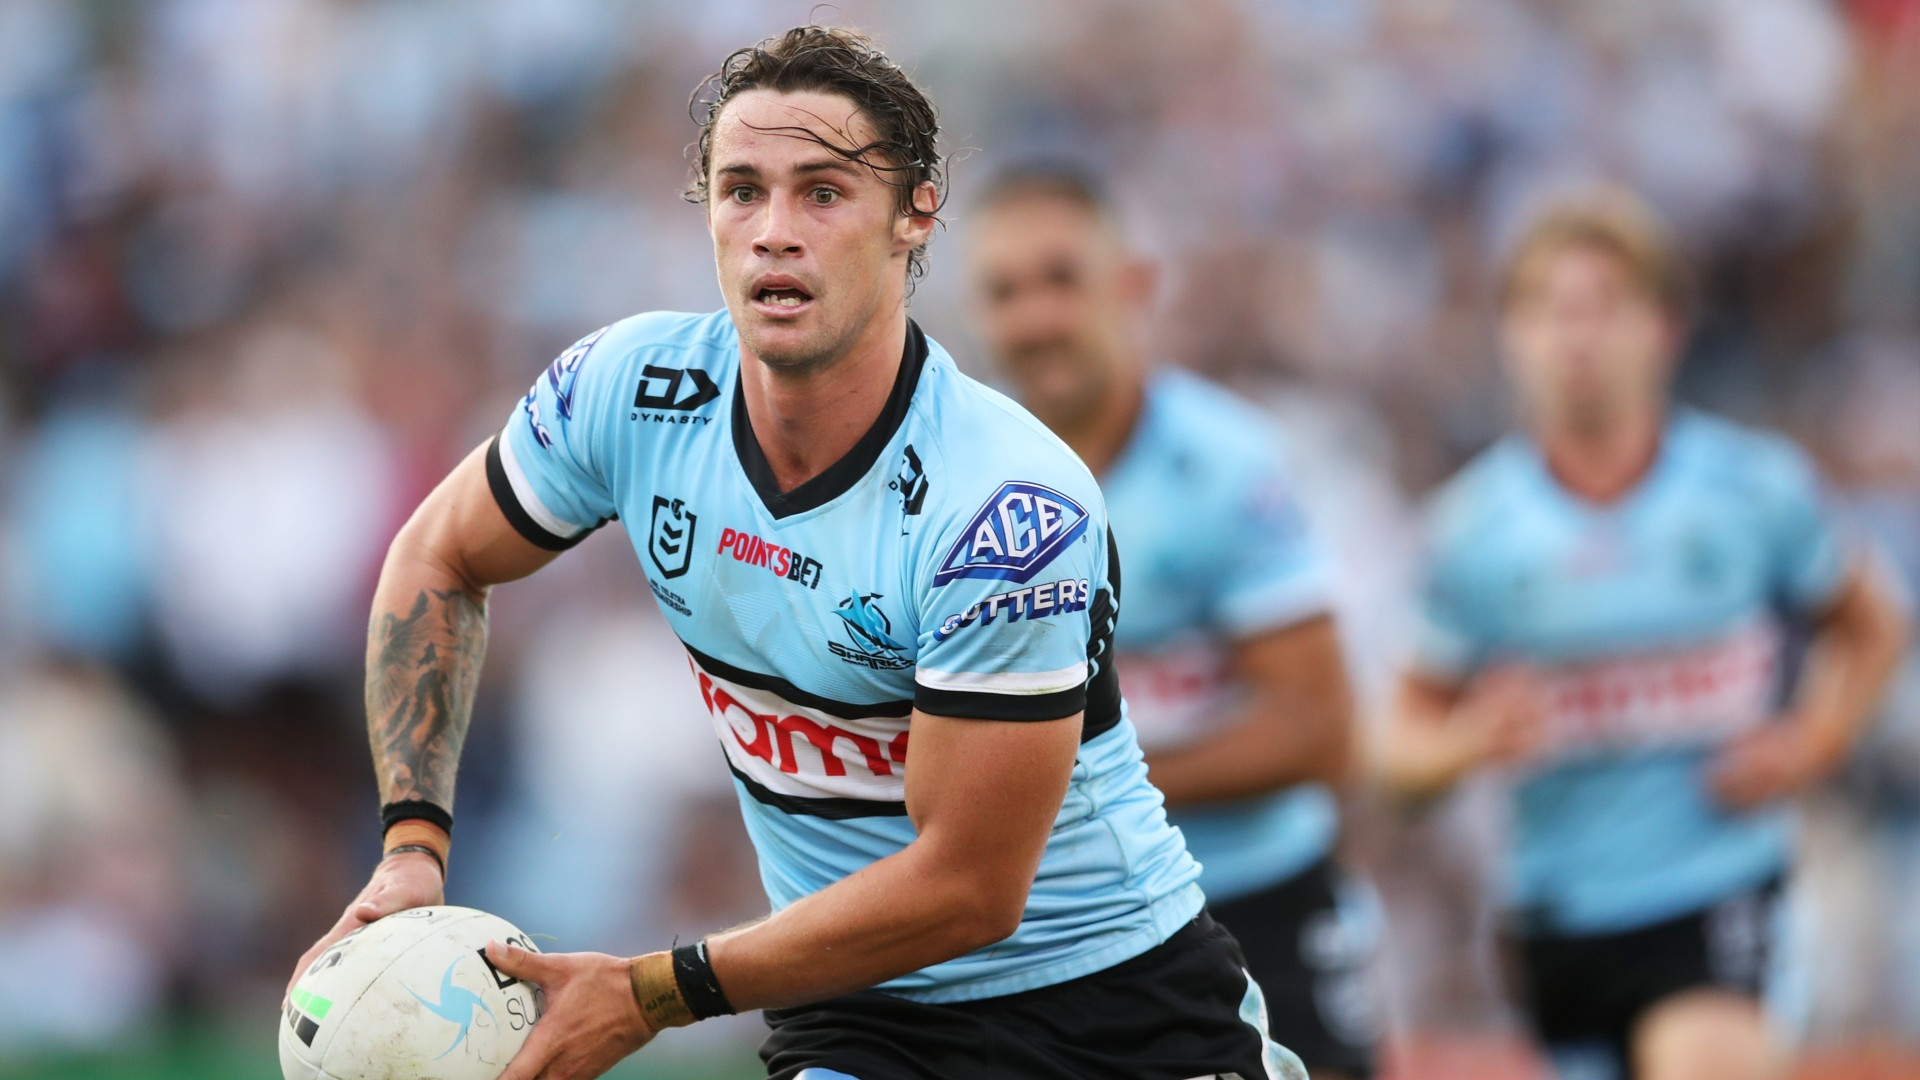 King of Cronulla: Sharks move to imprison Superstar Hynes for life